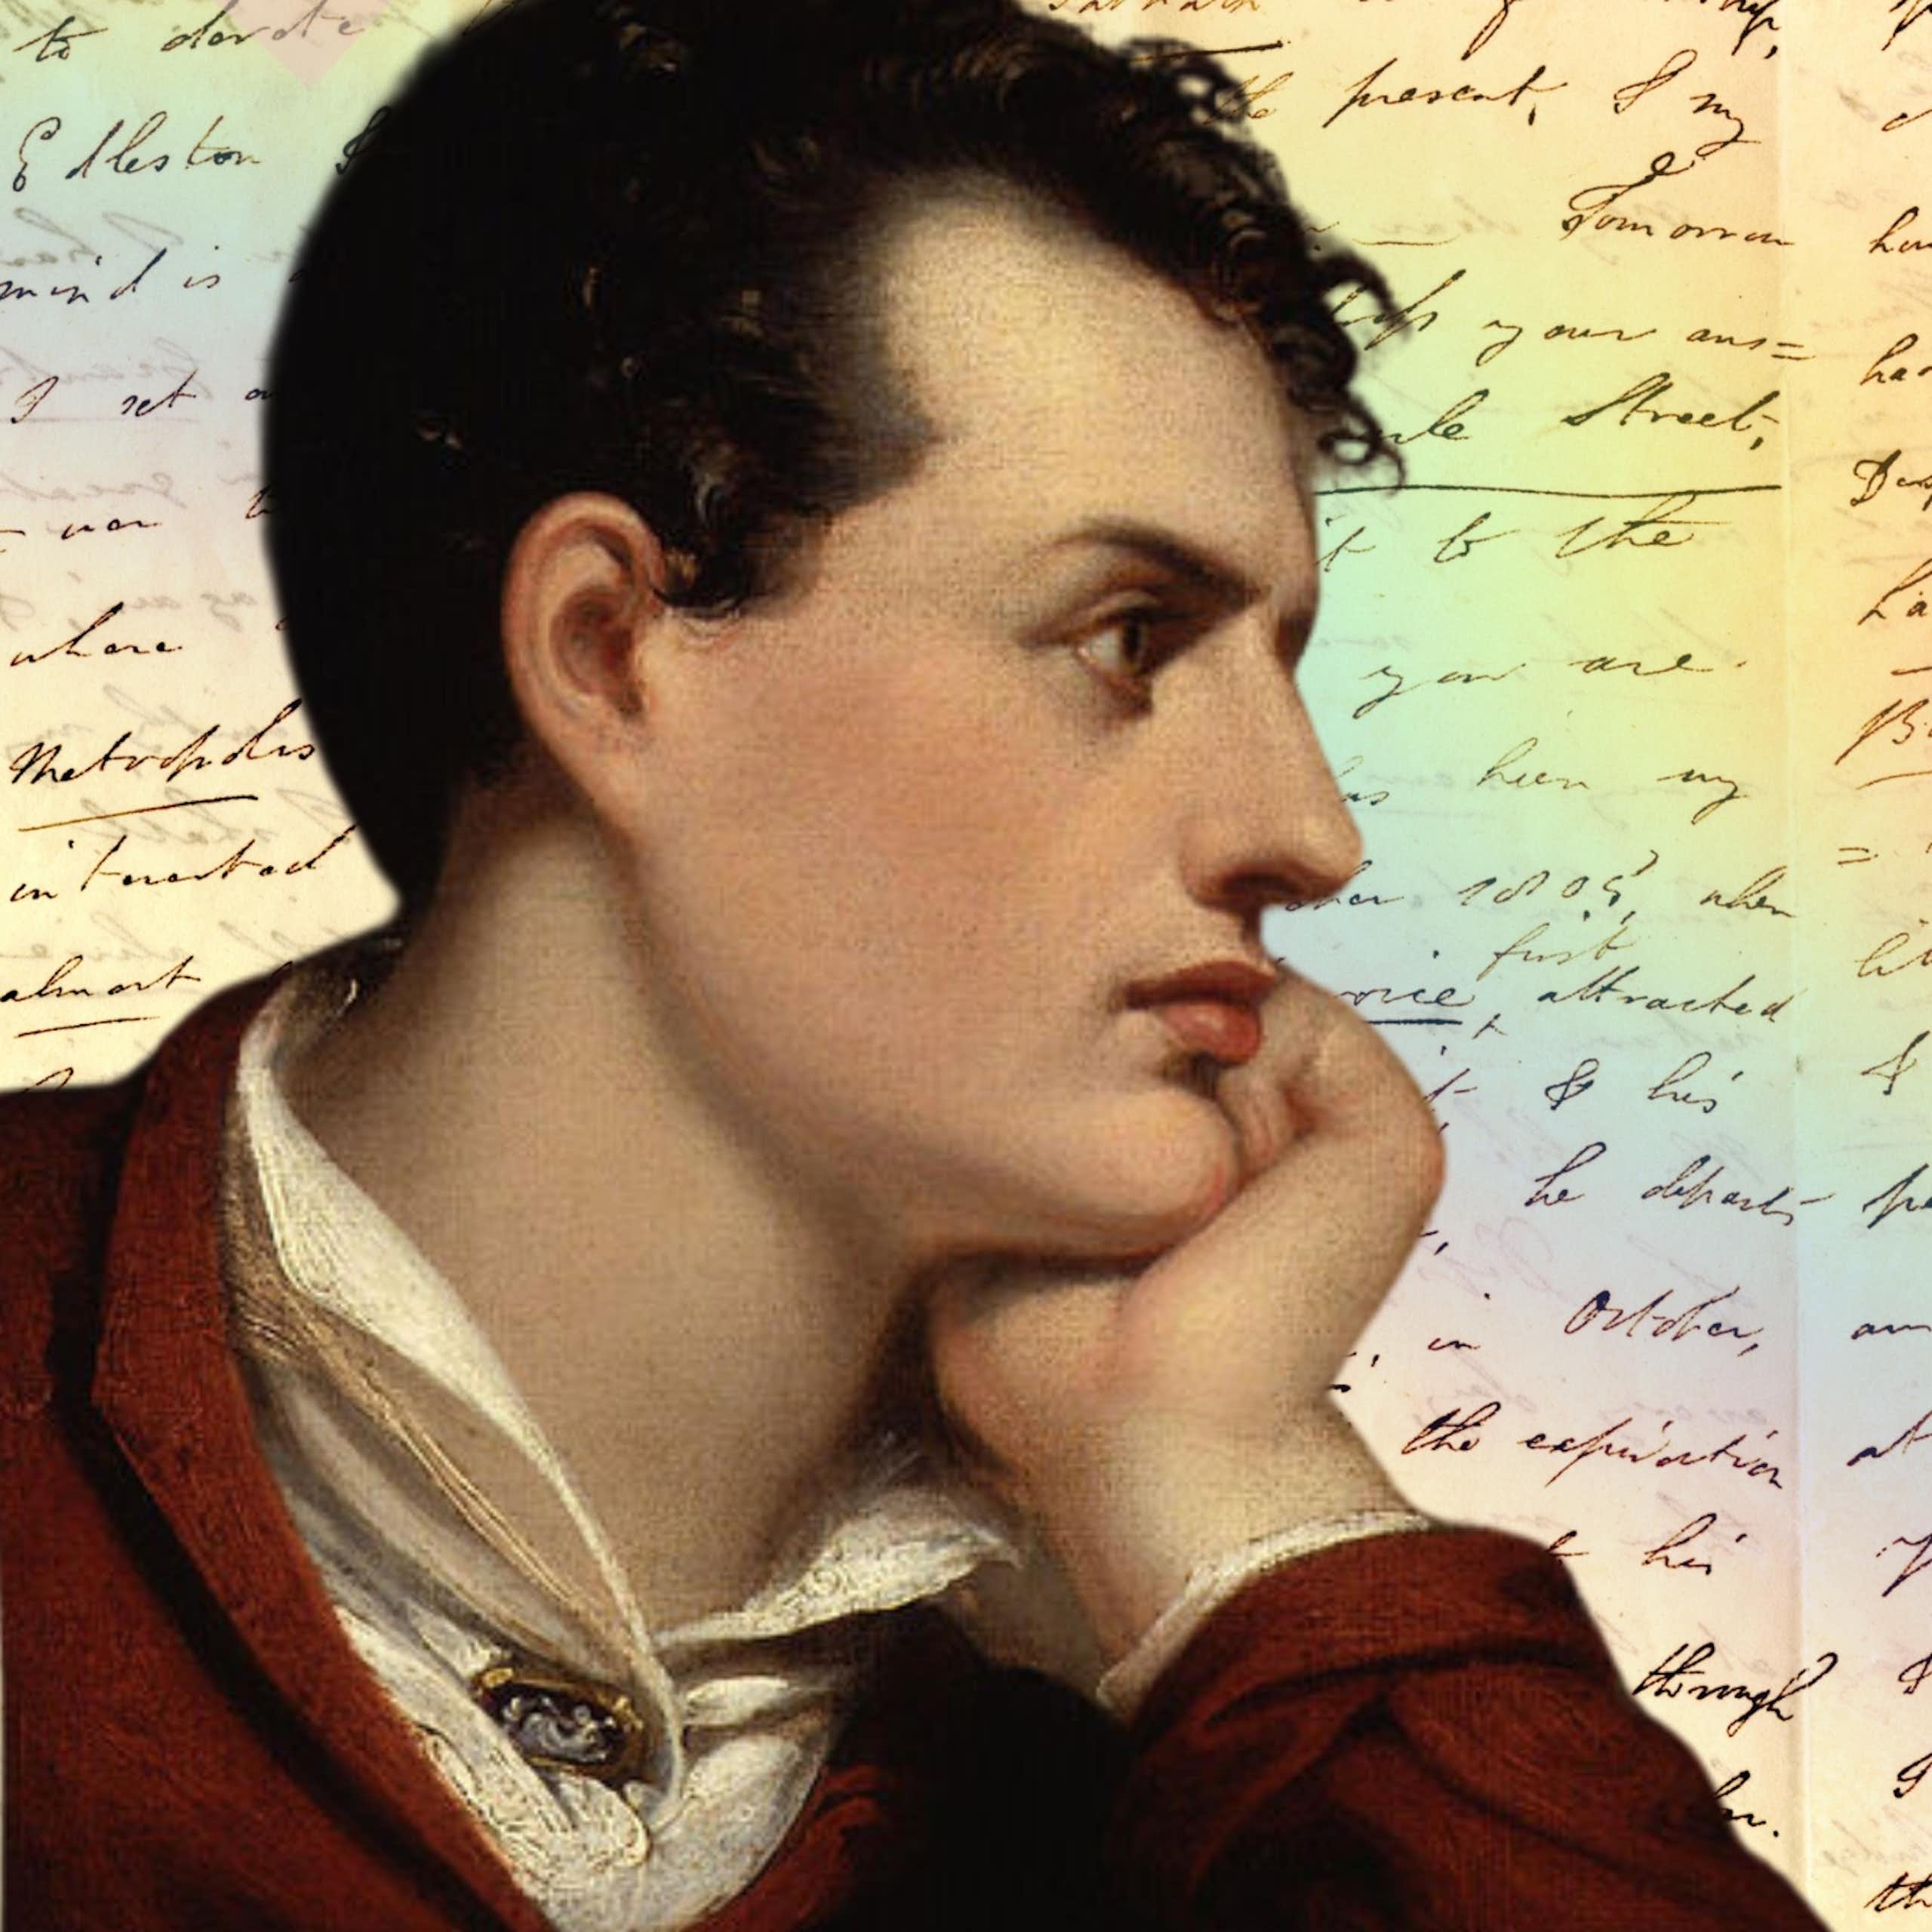 Cutout of Byron over a handwritten letter, with rainbow light